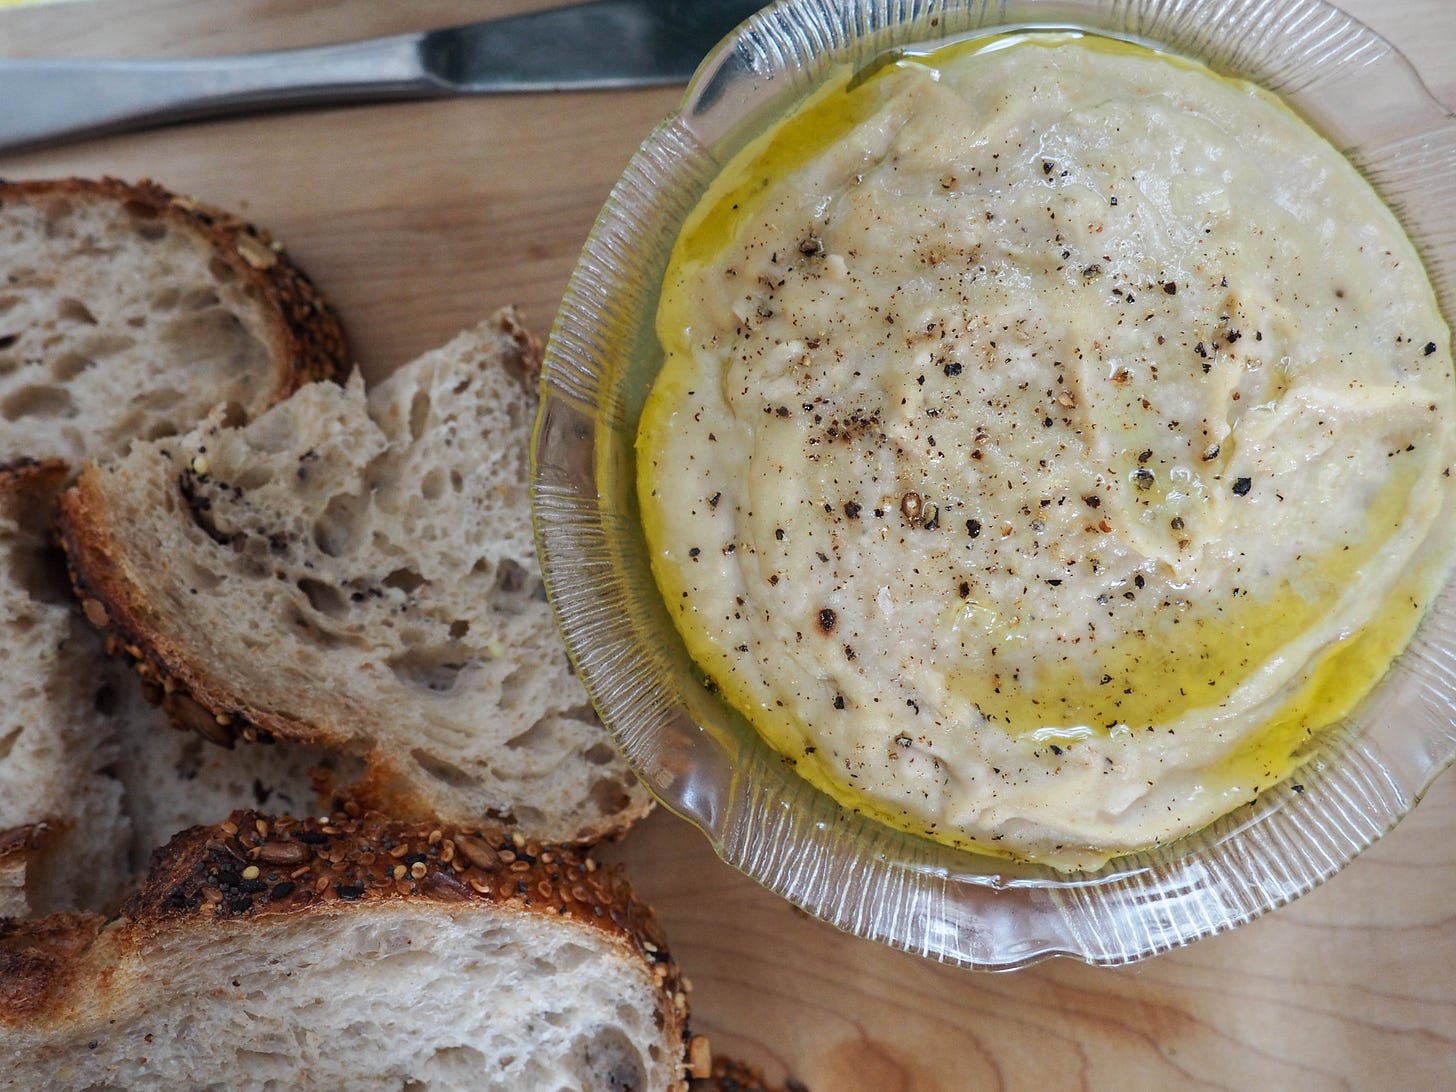 A bowl of white bean dip drizzled with extra olive oil and sprinkled with salt and pepper. To the left of the bowl there are slices of seedy bread.